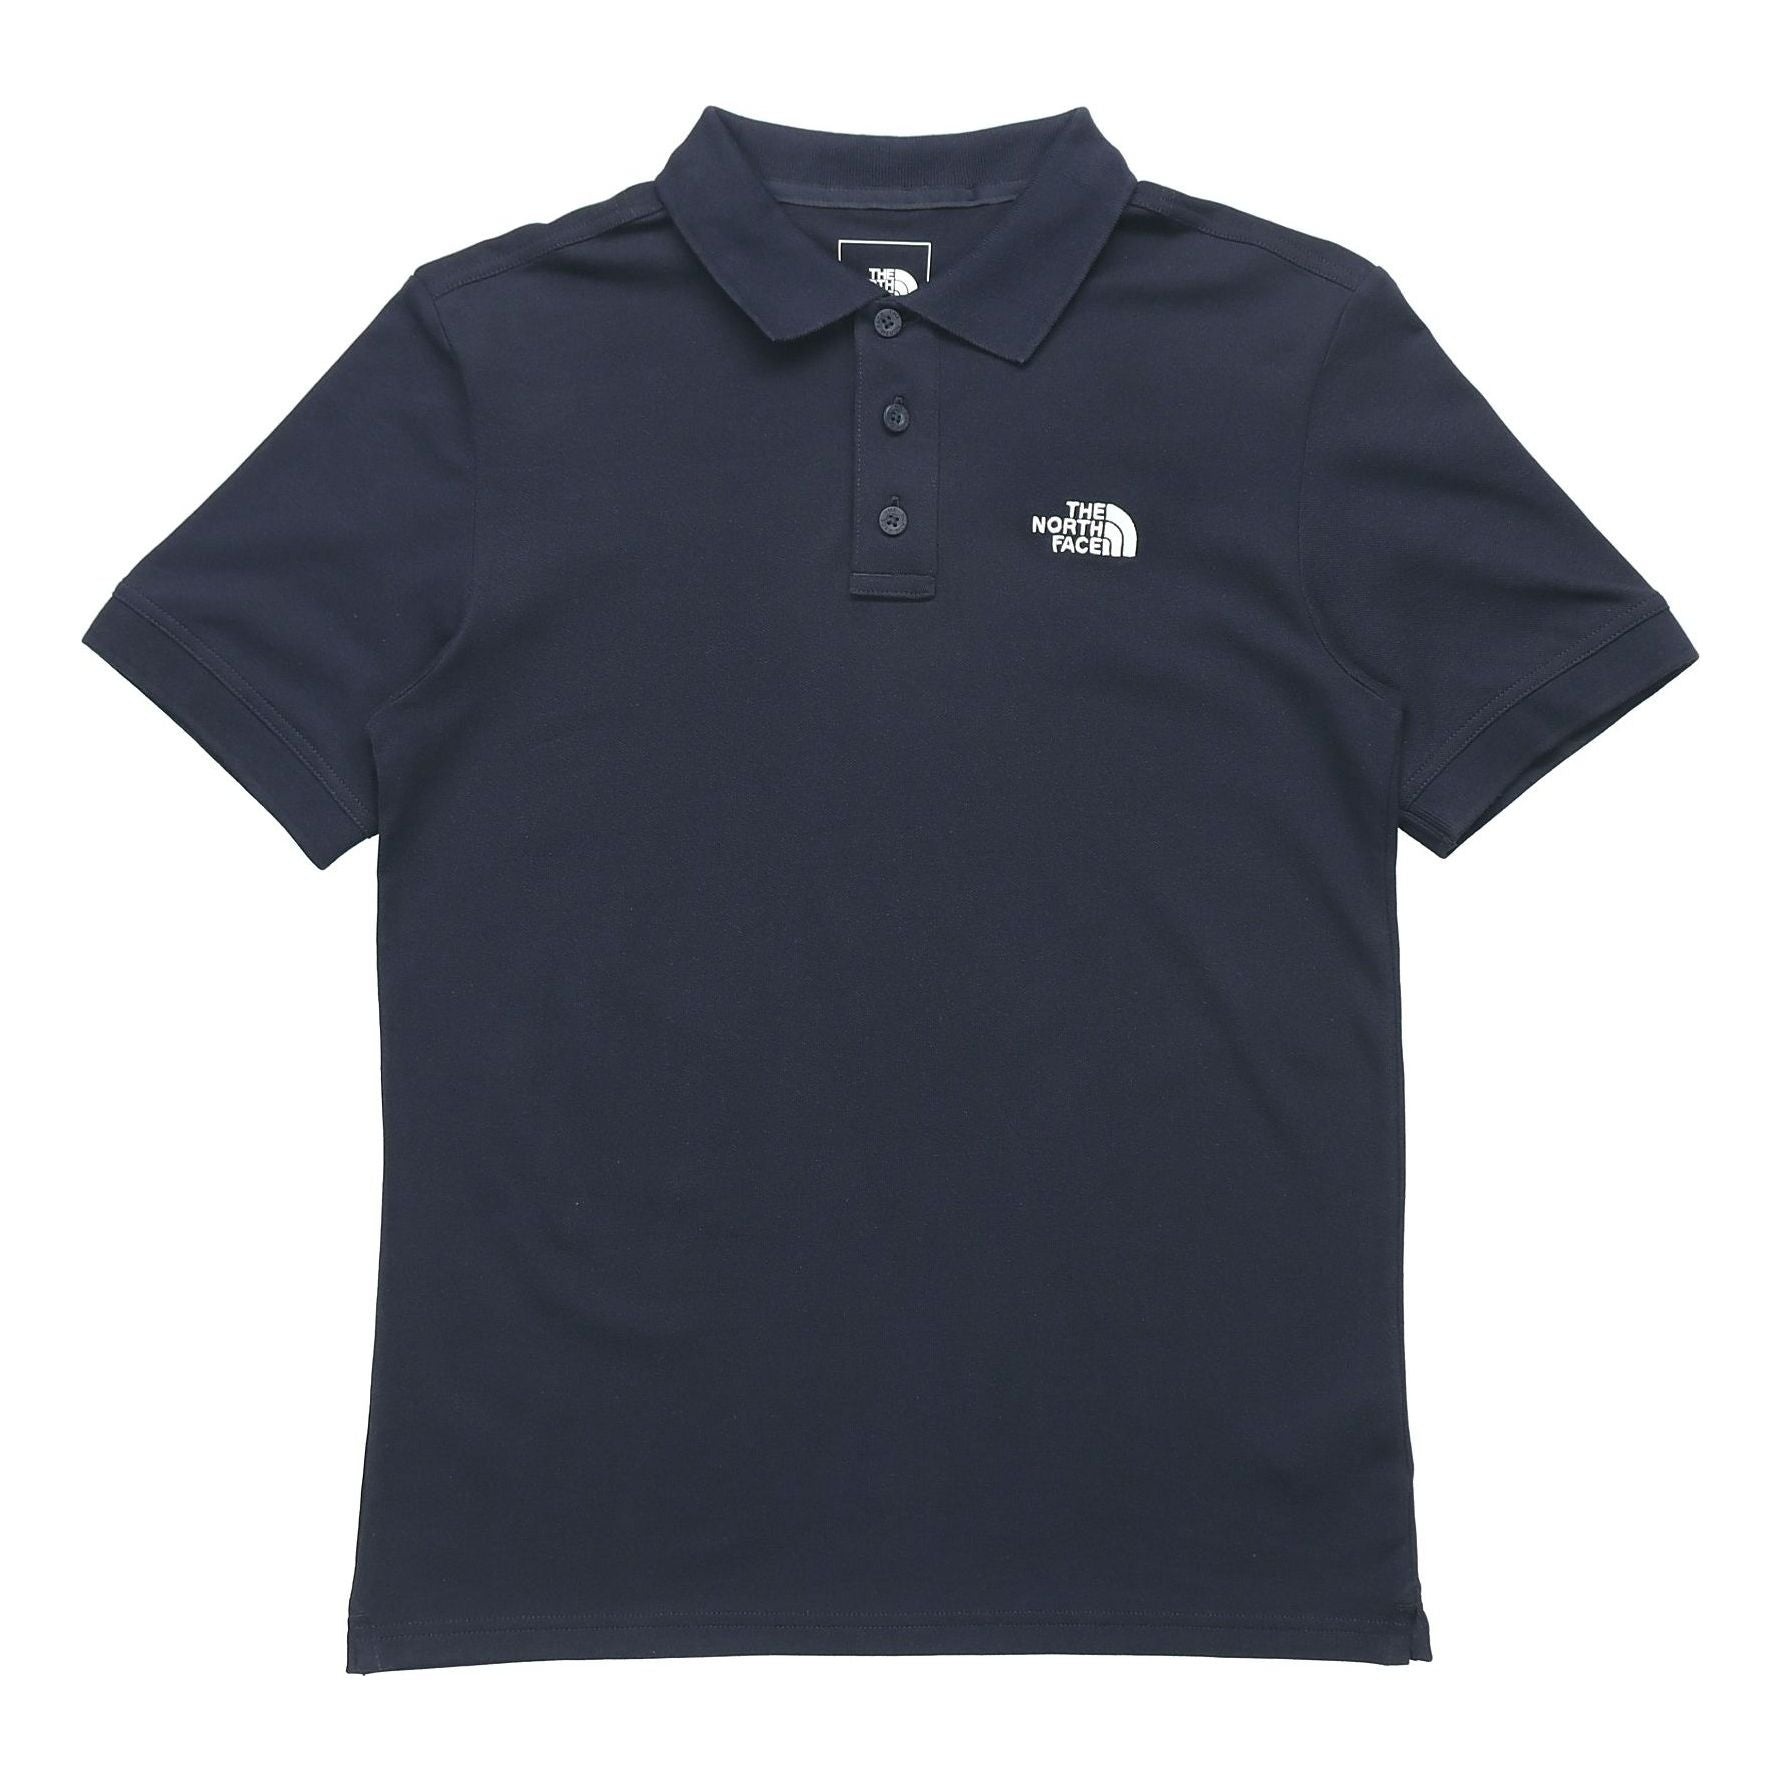 THE NORTH FACE Polo T-Shirts 'Navy' NF0A5B1O-RG1 - 1